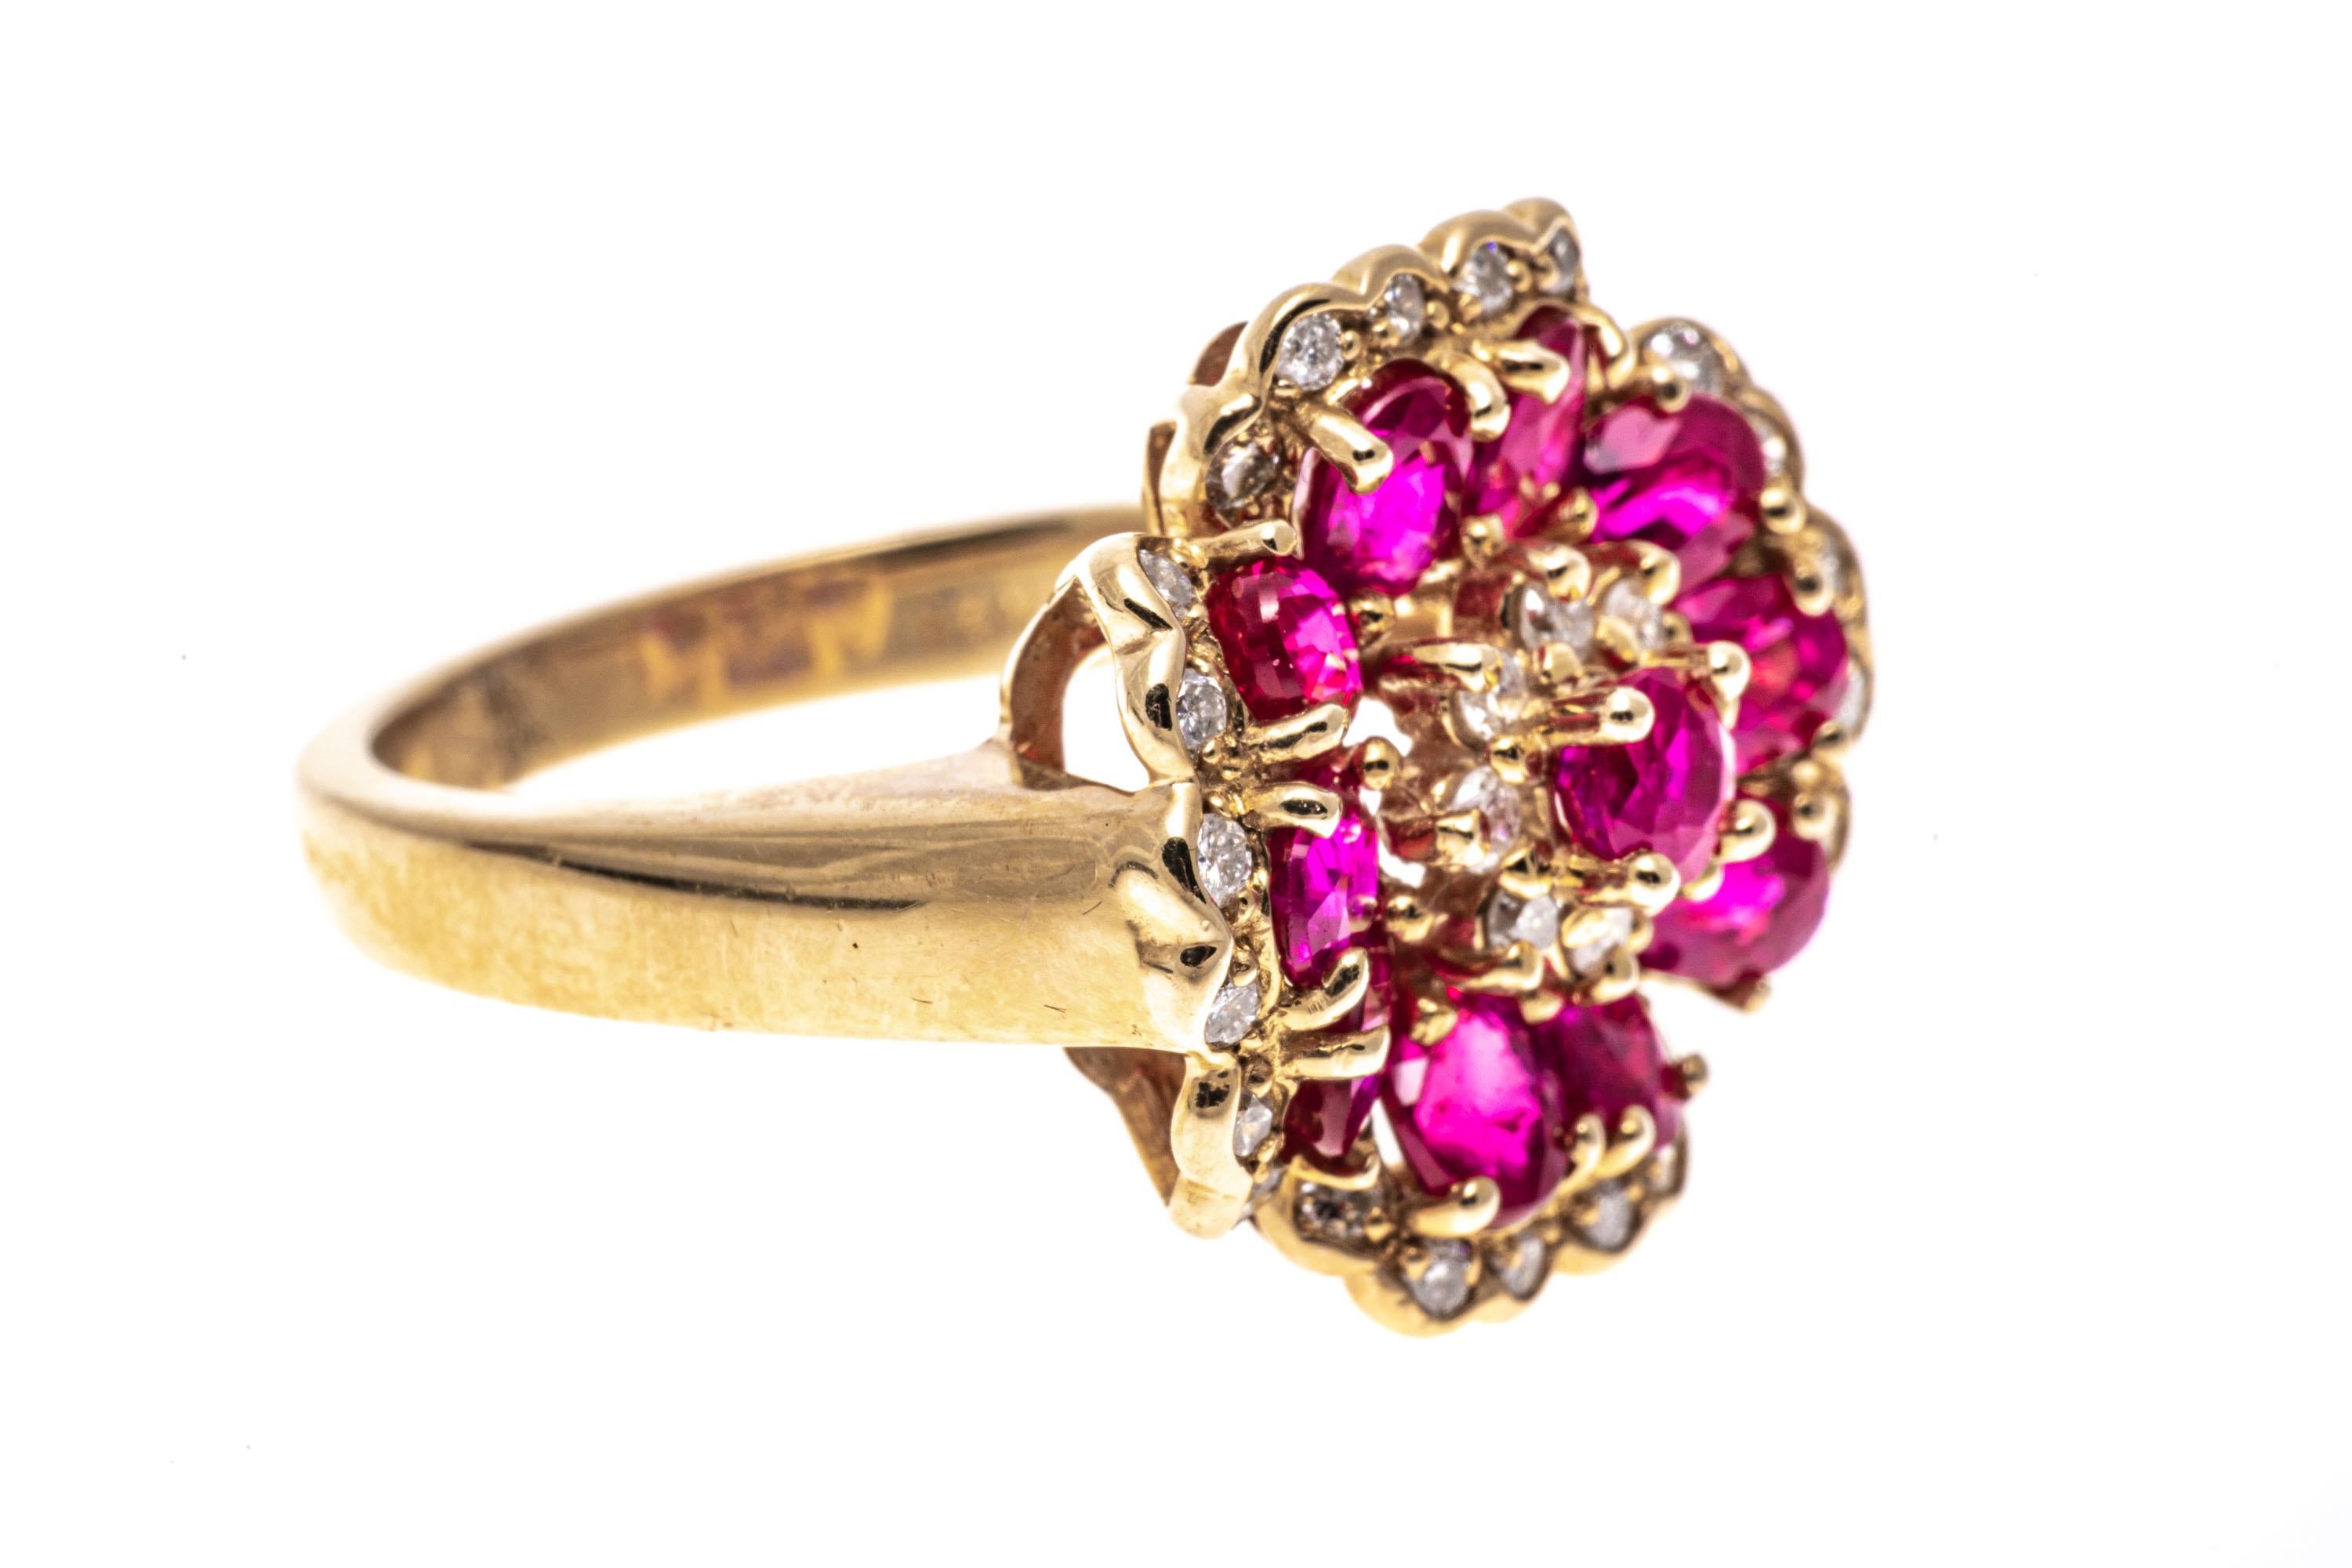 14k yellow gold ring. This beautiful flower motif ring is cent with a center round faceted, reddish pink ruby, approximately 0.19 CTS, decorated with a round faceted halo. Framing the halo is a border of angled, oval faceted, reddish pink color